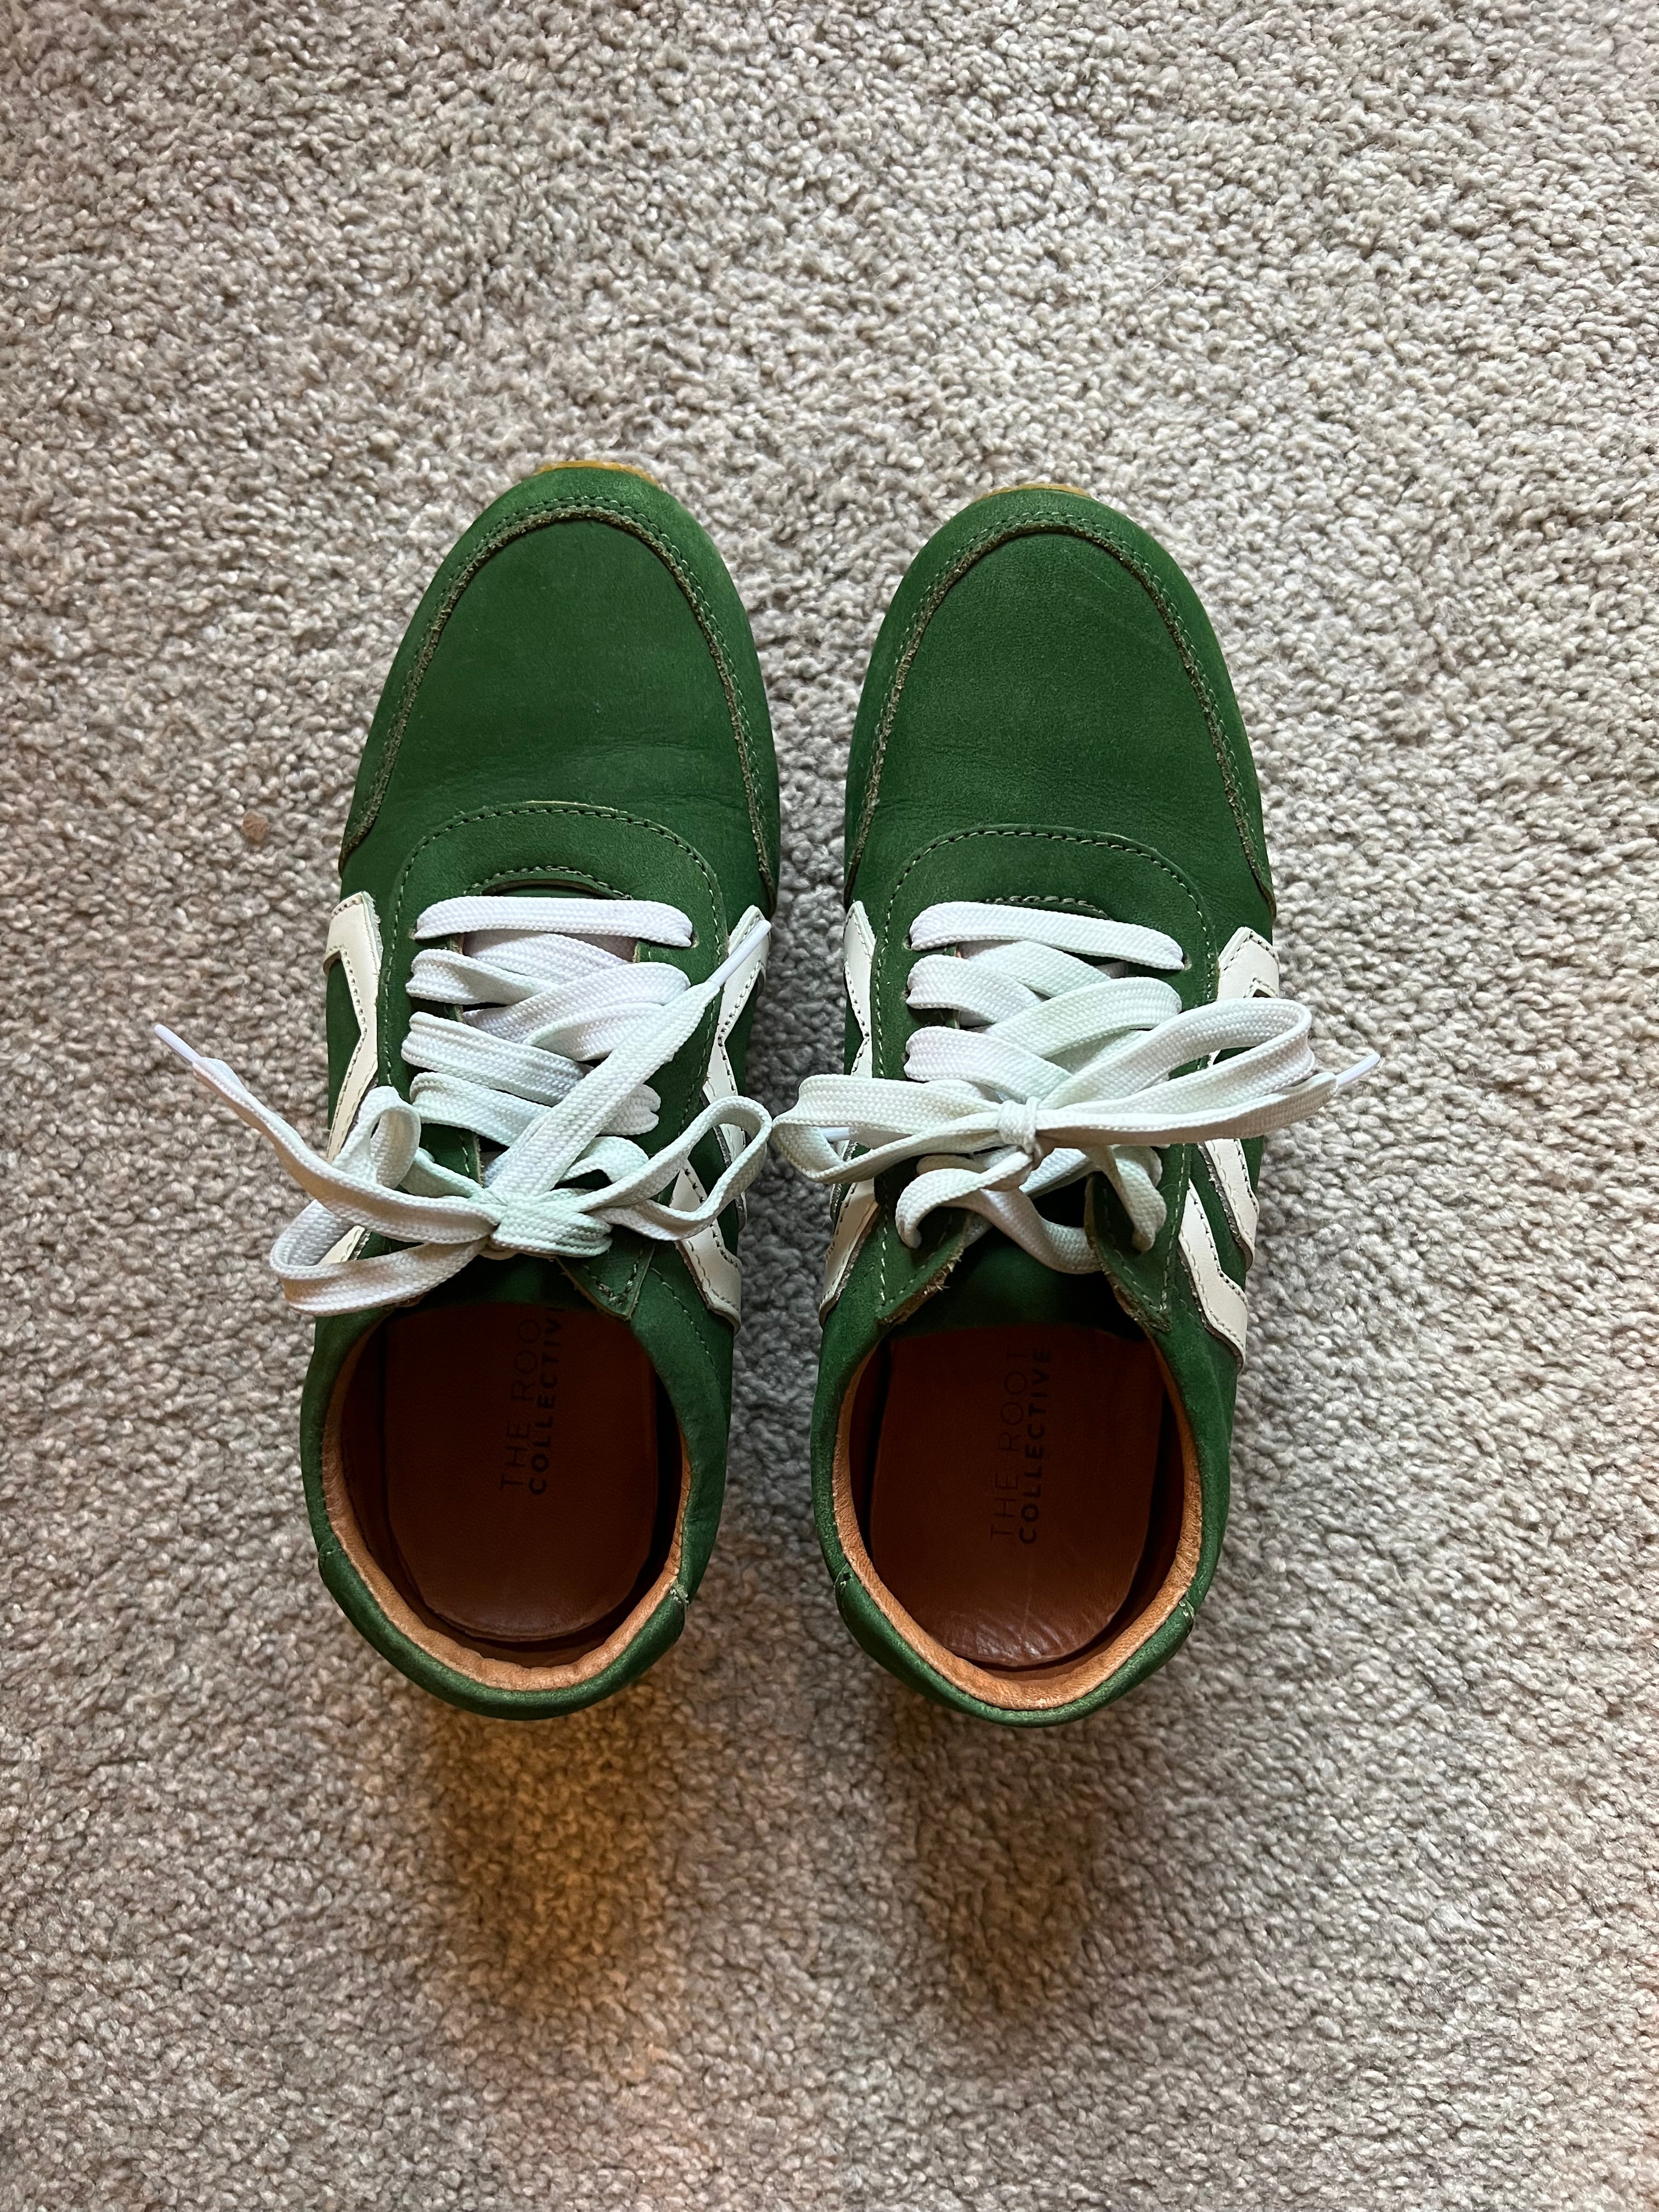 LIMITED EDITION Jessie in Kelly Green  size 7 - Pre-loved